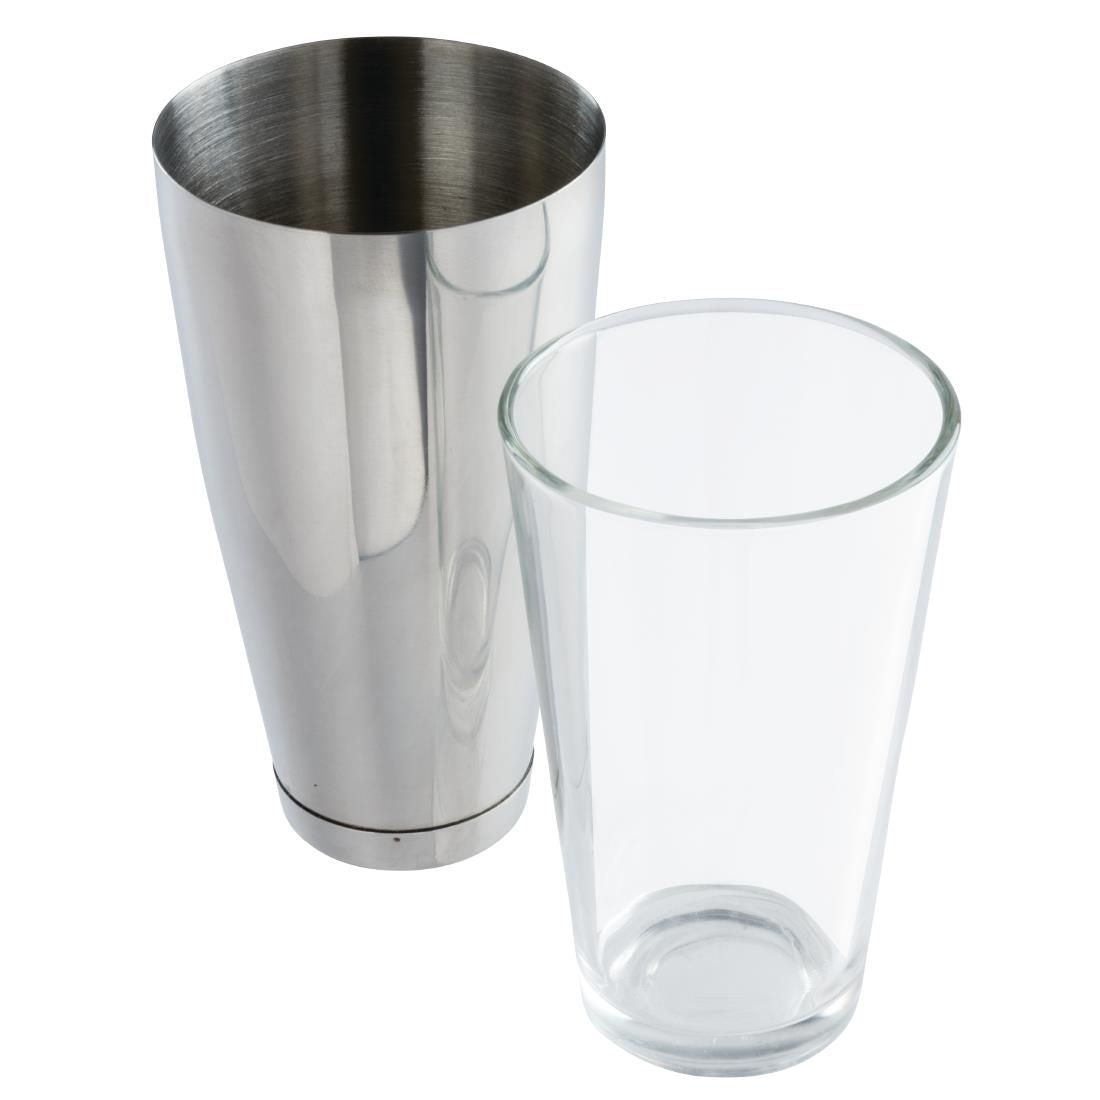 APS Boston Shaker and Glass - S766 Home Bar APS   